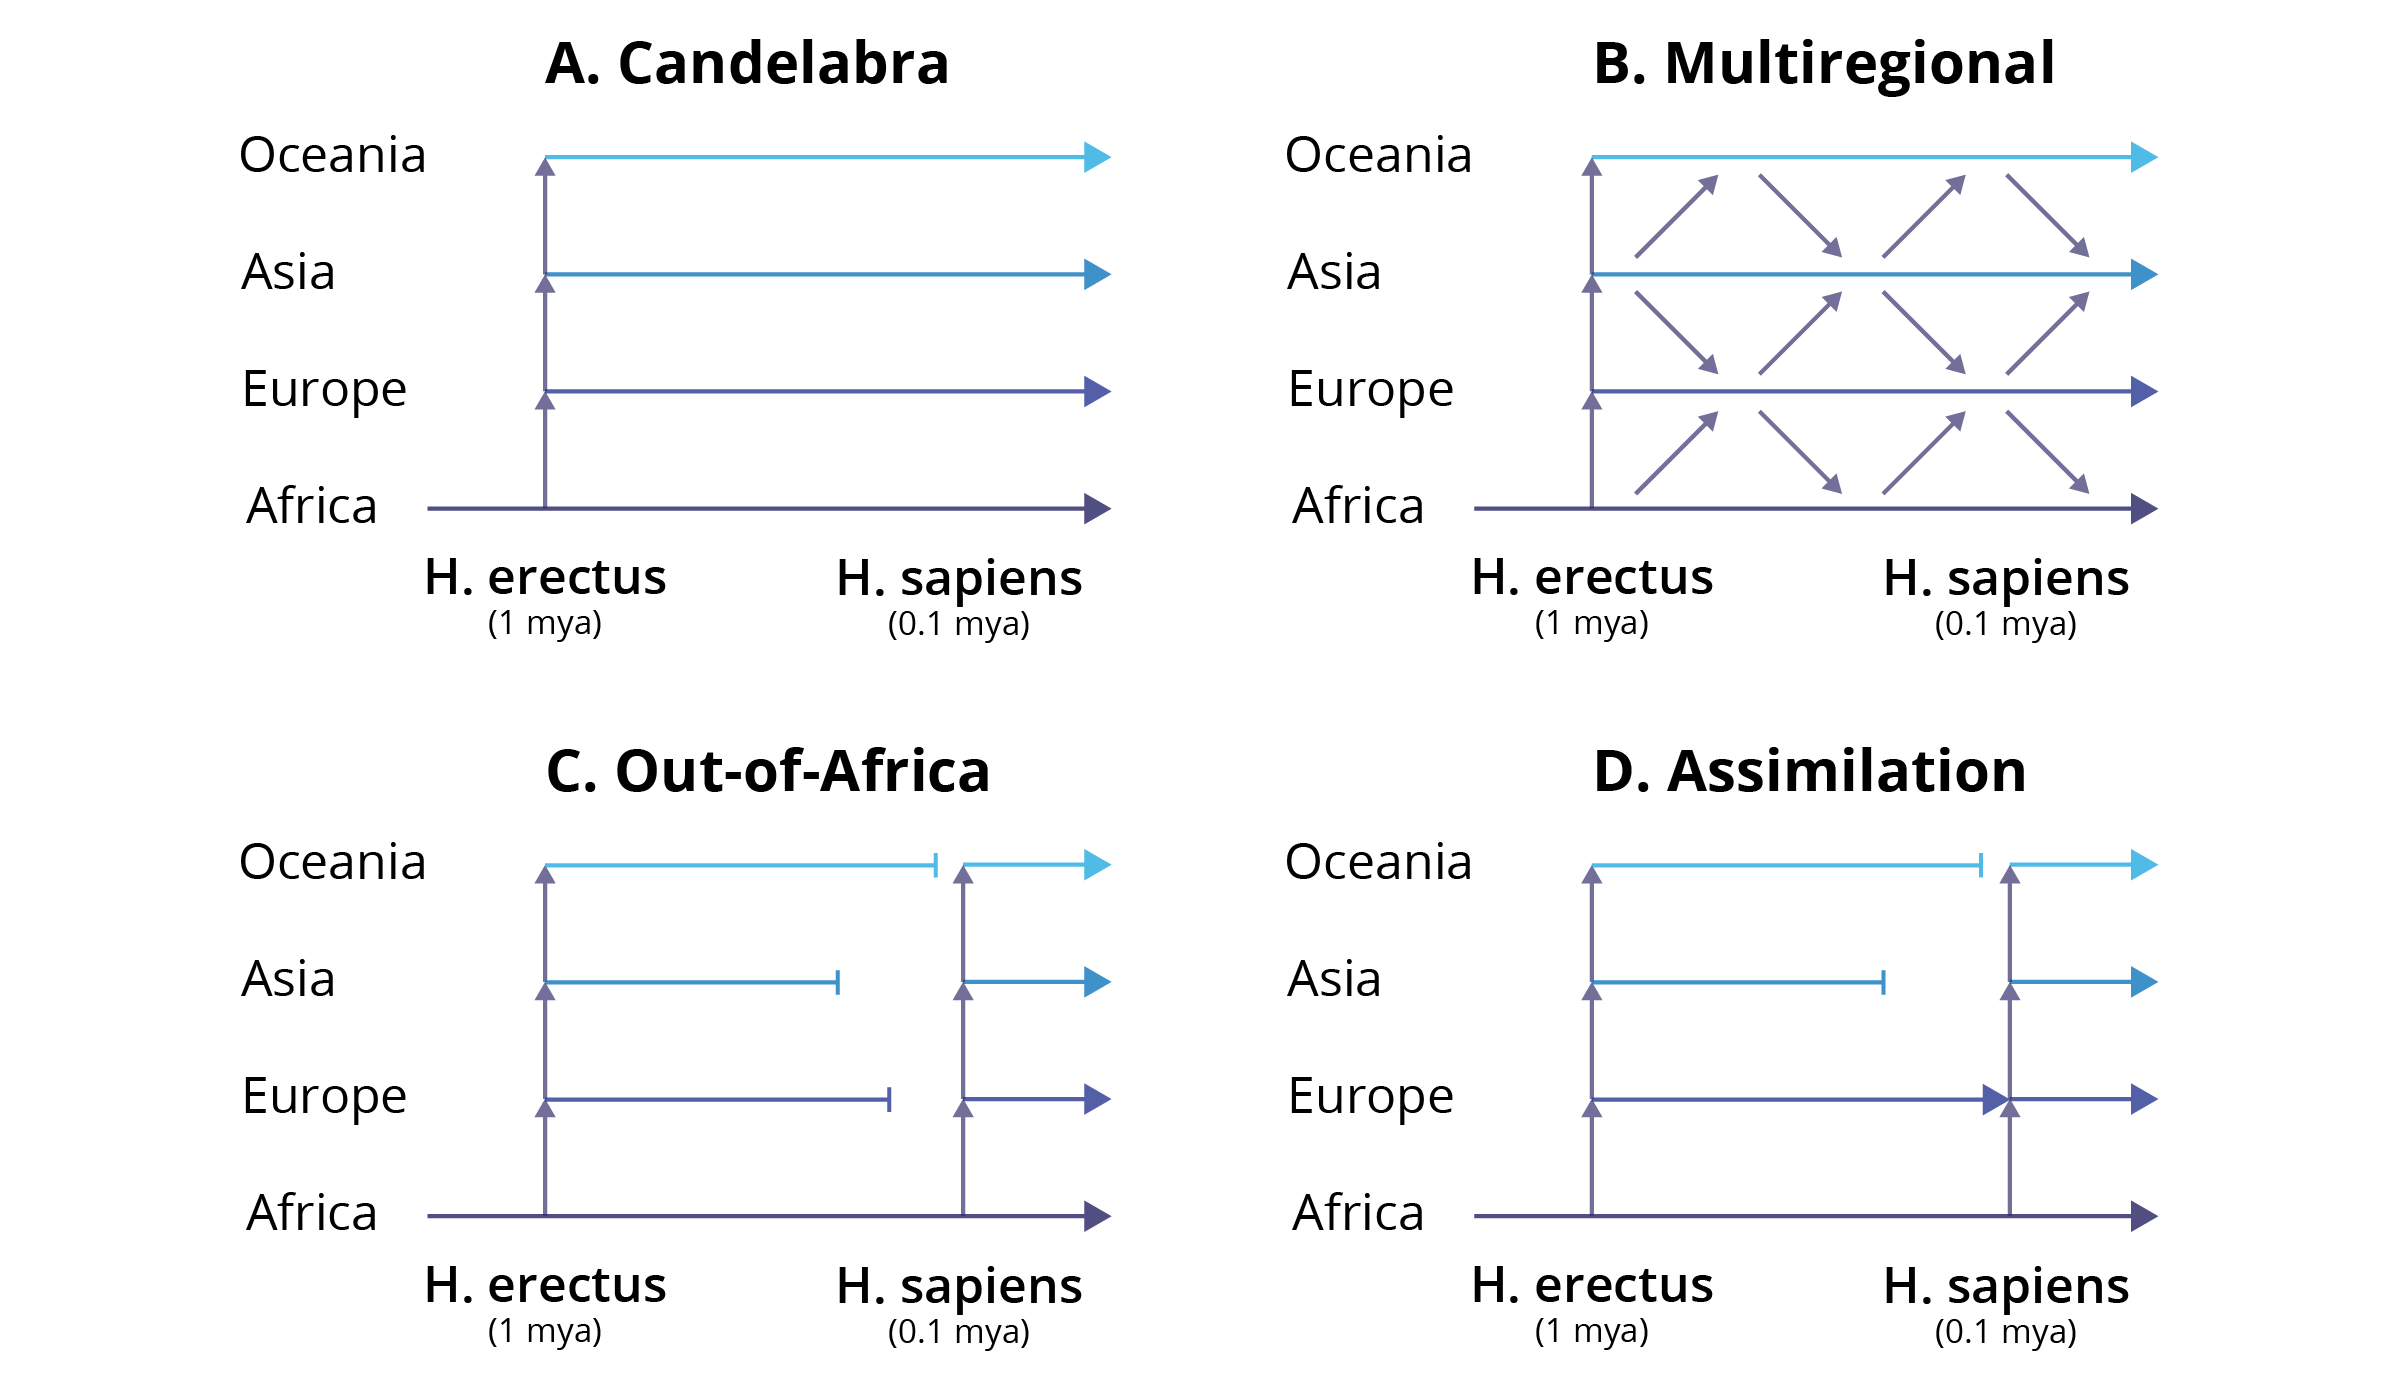 Hypotheses explaining the origin of modern himans (see text for details): A. candelabra hypothesis; B. multiregional; C. out-of-Africa (or African replacement) hypothesis; D. hybridization-and-assimilation hypothesis.